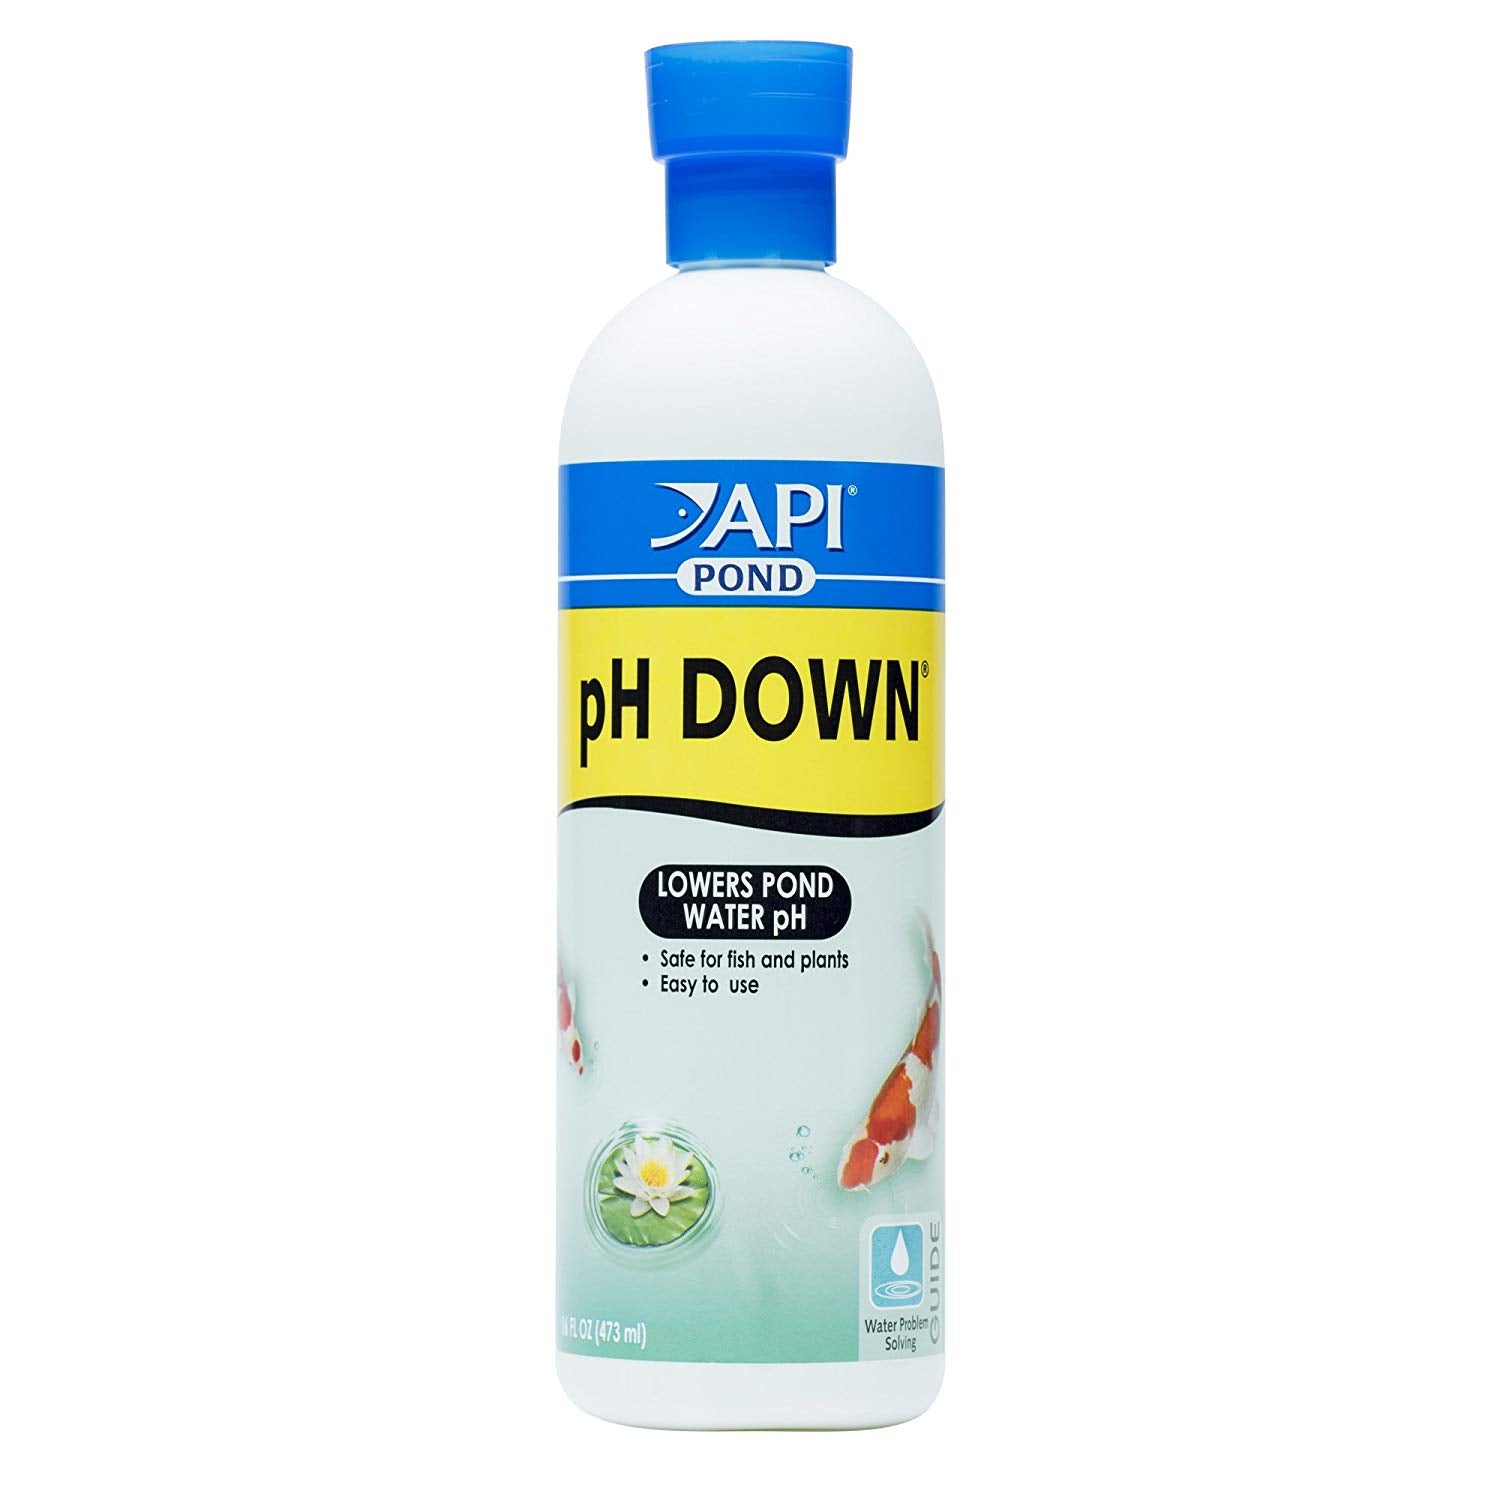 API Pond pH Down Lowers Pod Water pH Safe for Fish and Plants